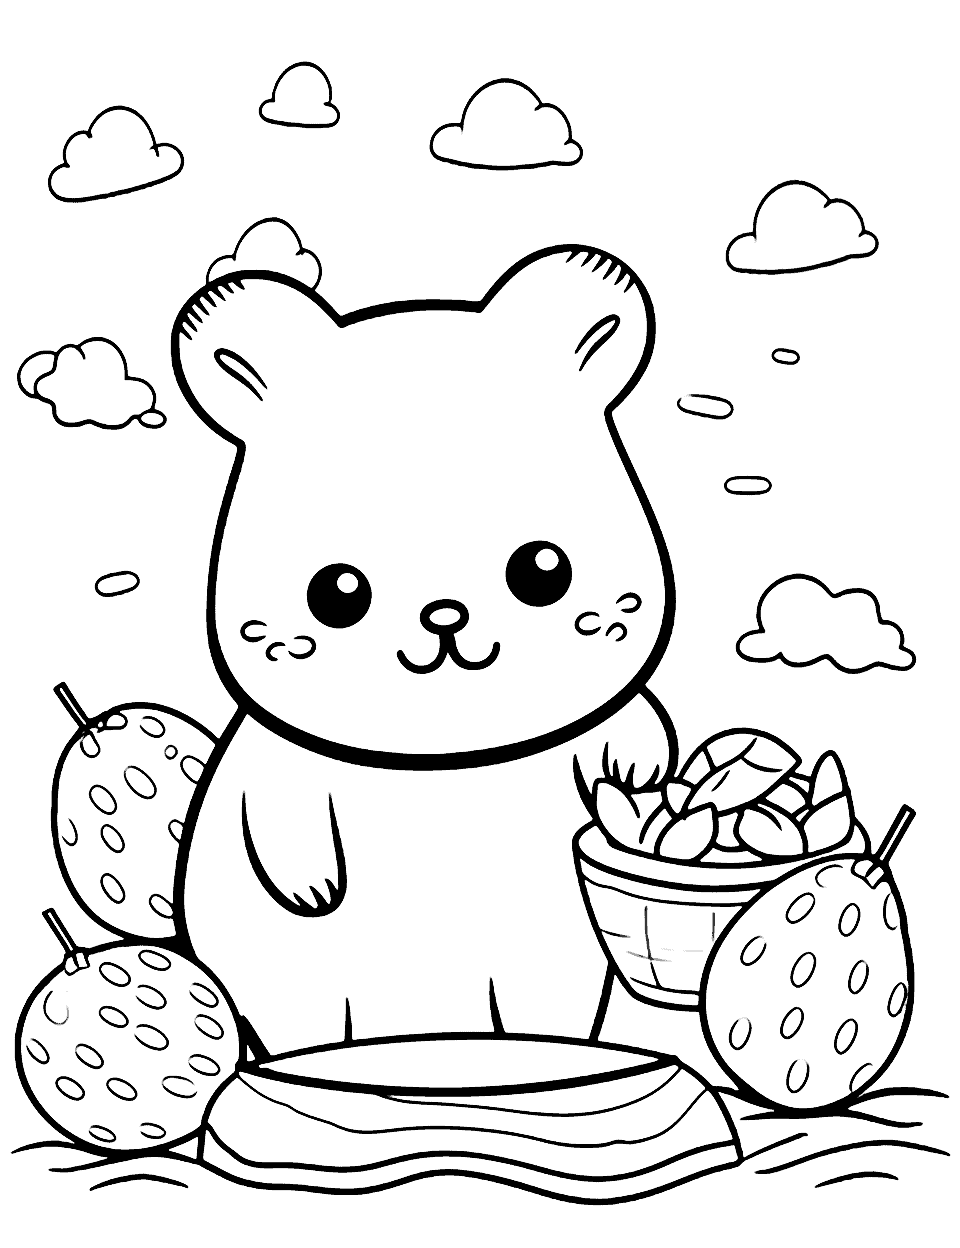 Fox's Summer Fruit Bash Kawaii Coloring Page - A Kawaii fox having a feast with summer fruits like watermelon and other fruits.